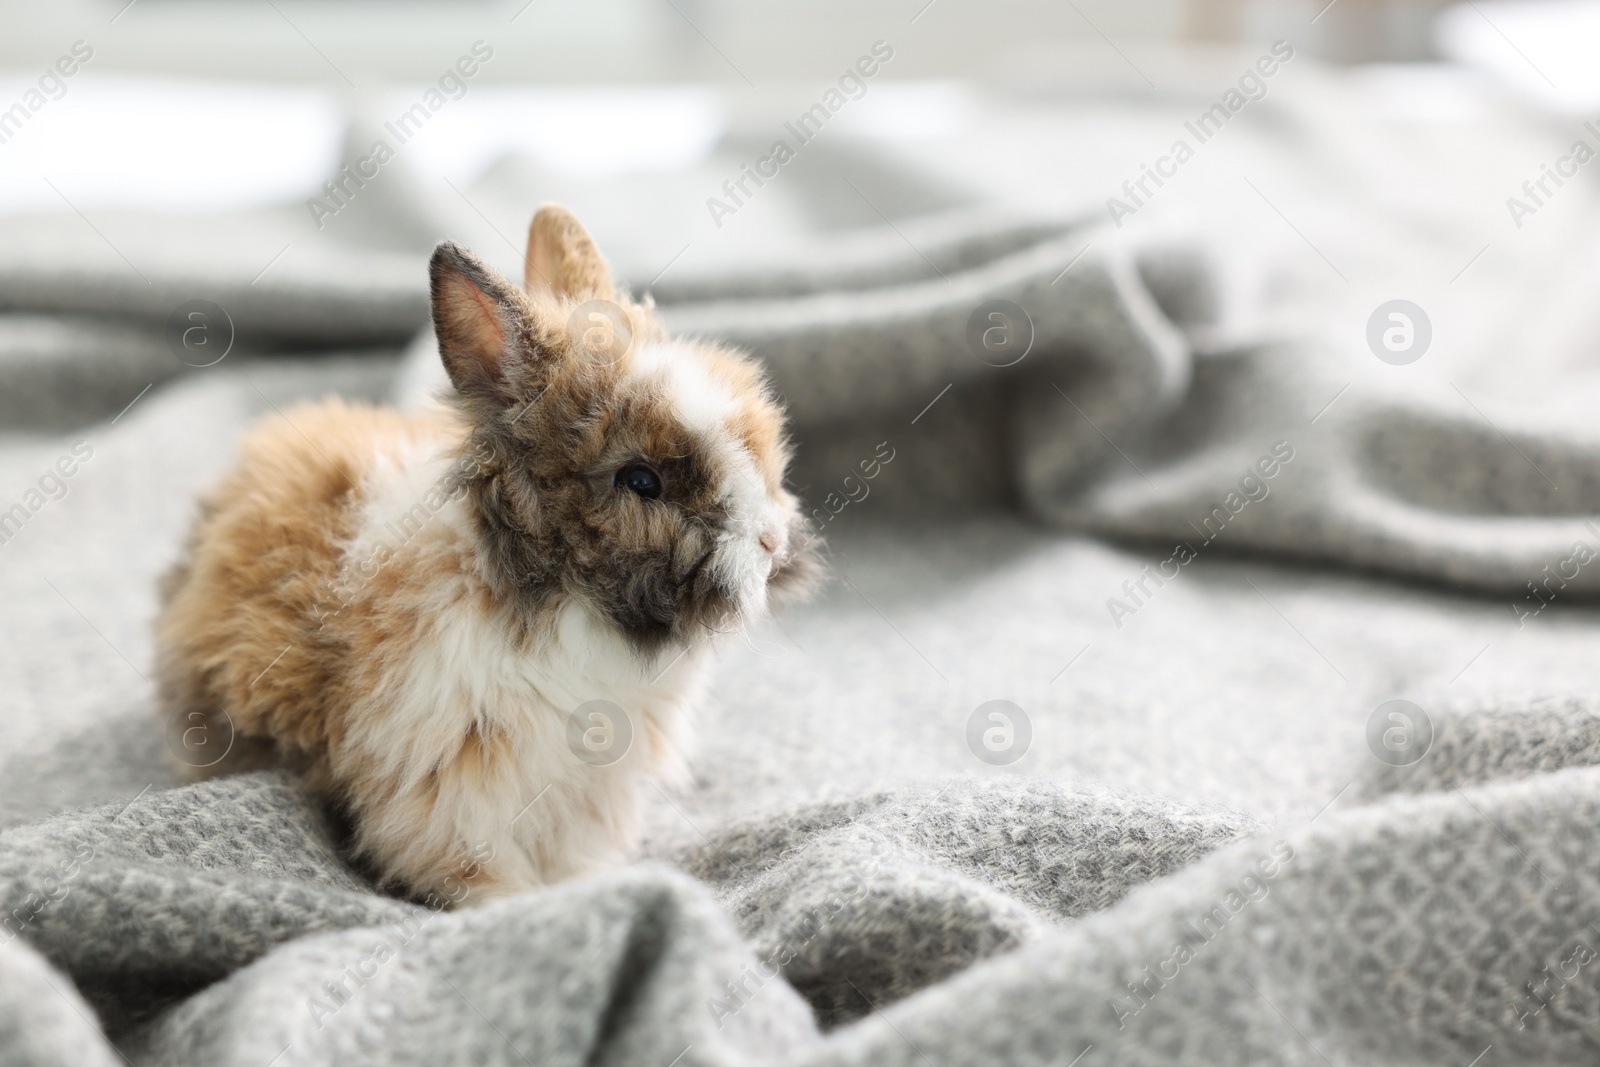 Photo of Cute fluffy pet rabbit on soft blanket. Space for text